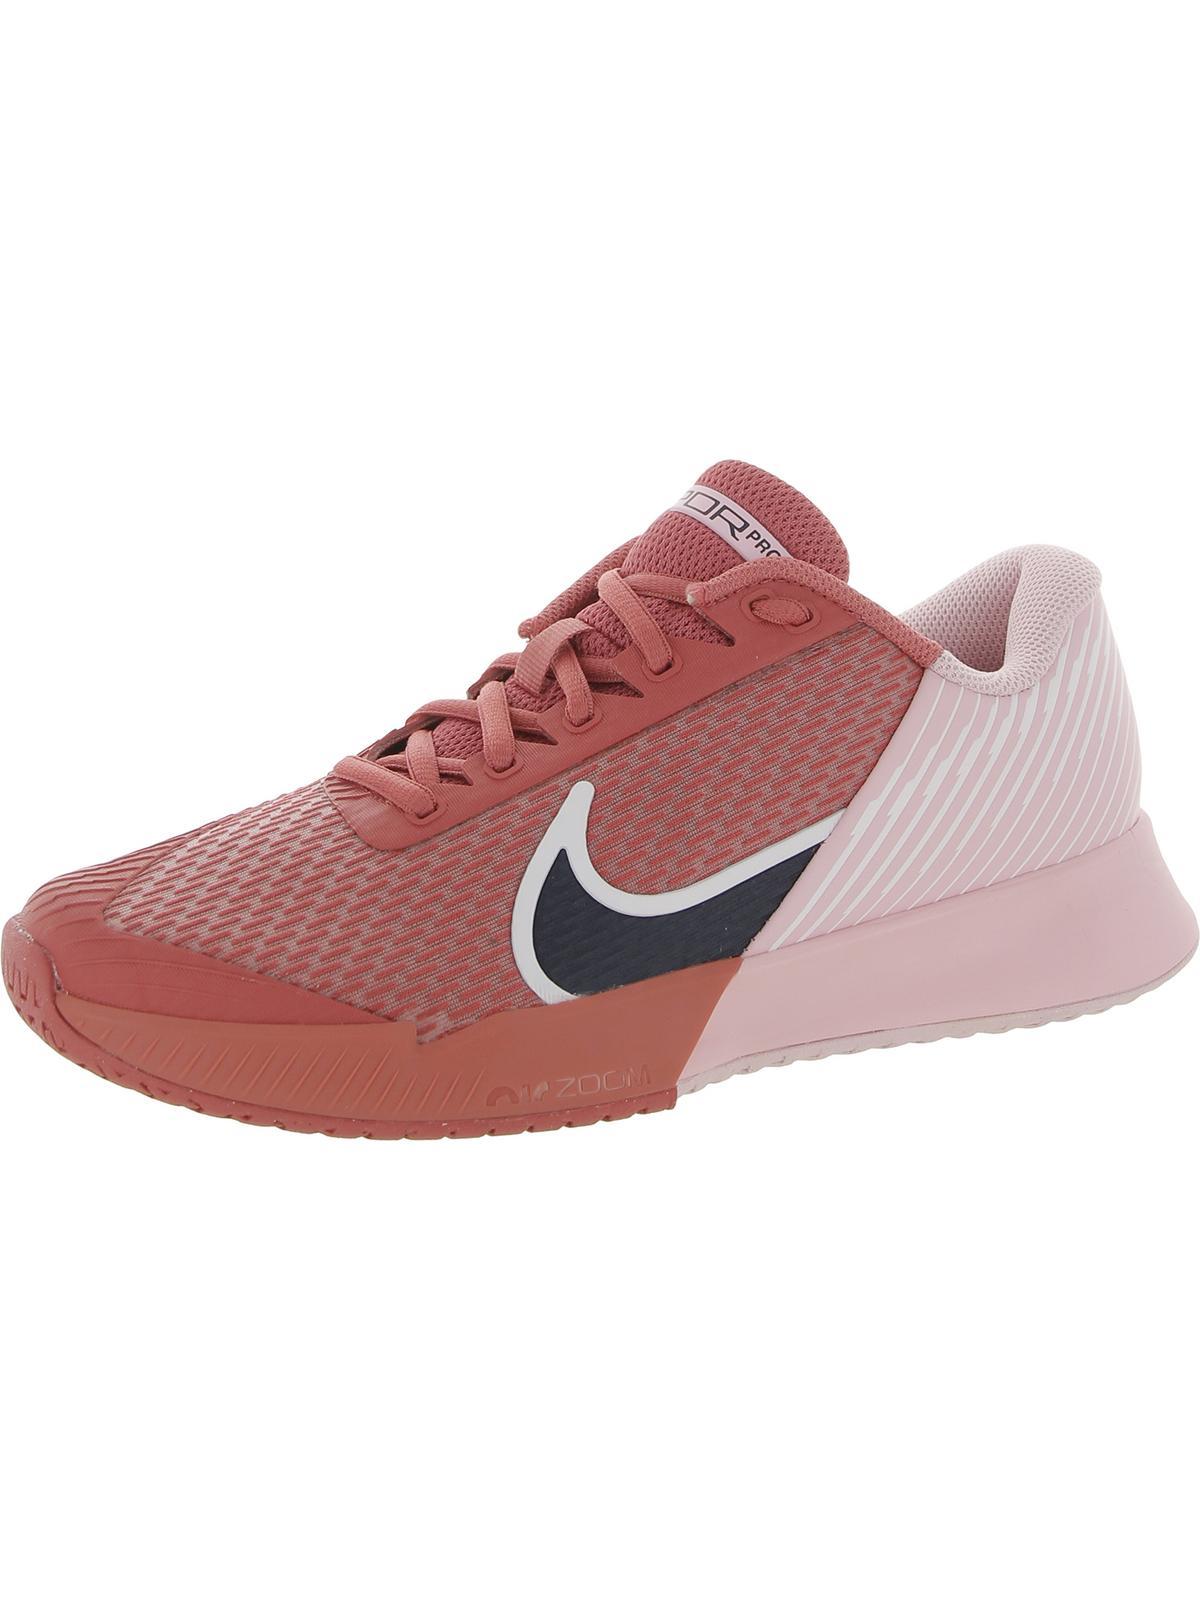 Nike Zoom Vapor Pro 2 Hc Tennis Fitness Running Shoes in Pink | Lyst